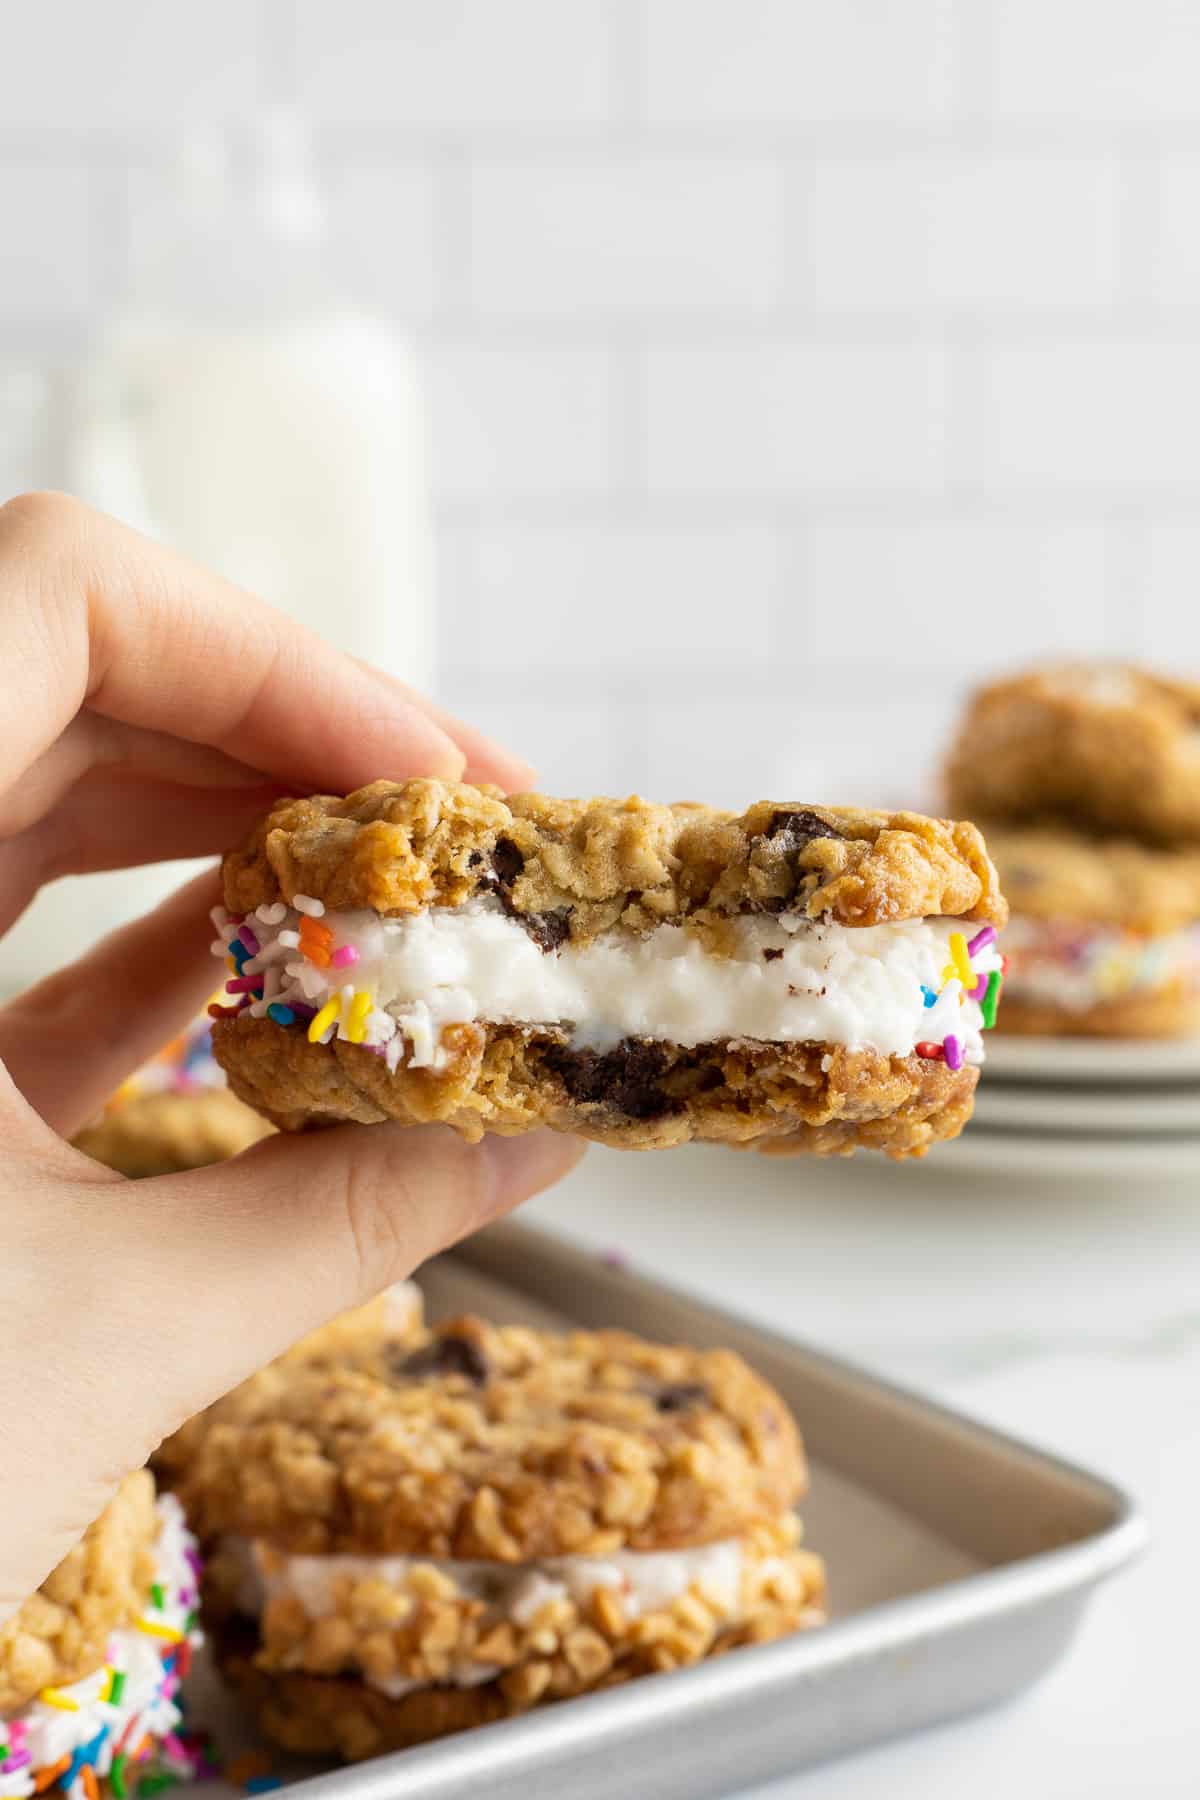 A hand holding a cookie ice cream sandwich with a bite missing.